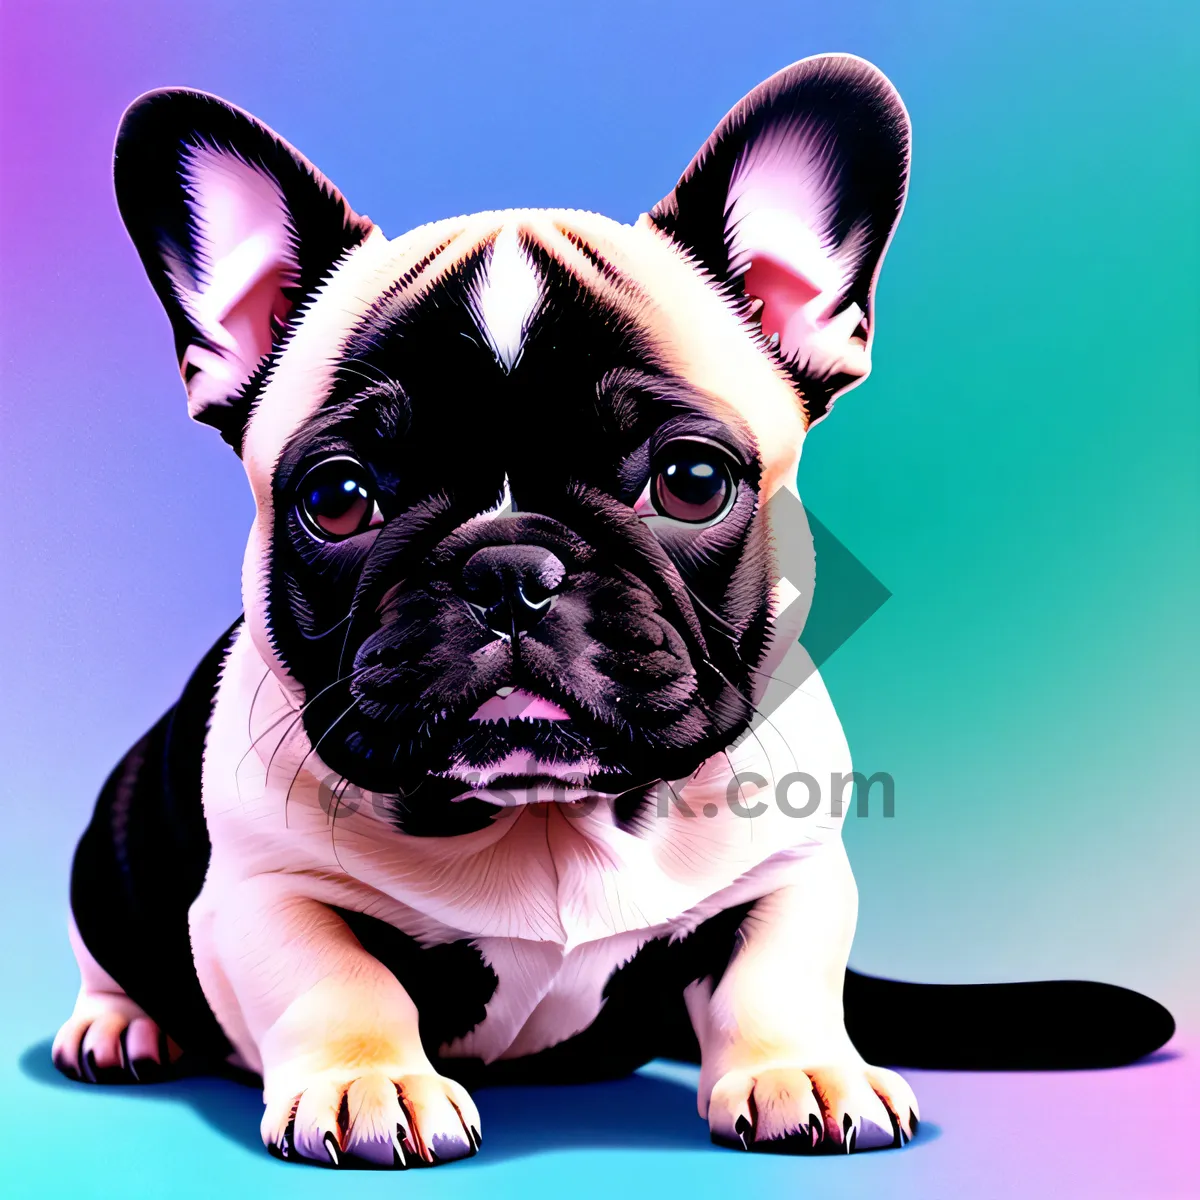 Picture of Bulldog puppy with a lovable wrinkled face, showcased in a delightful studio portrait